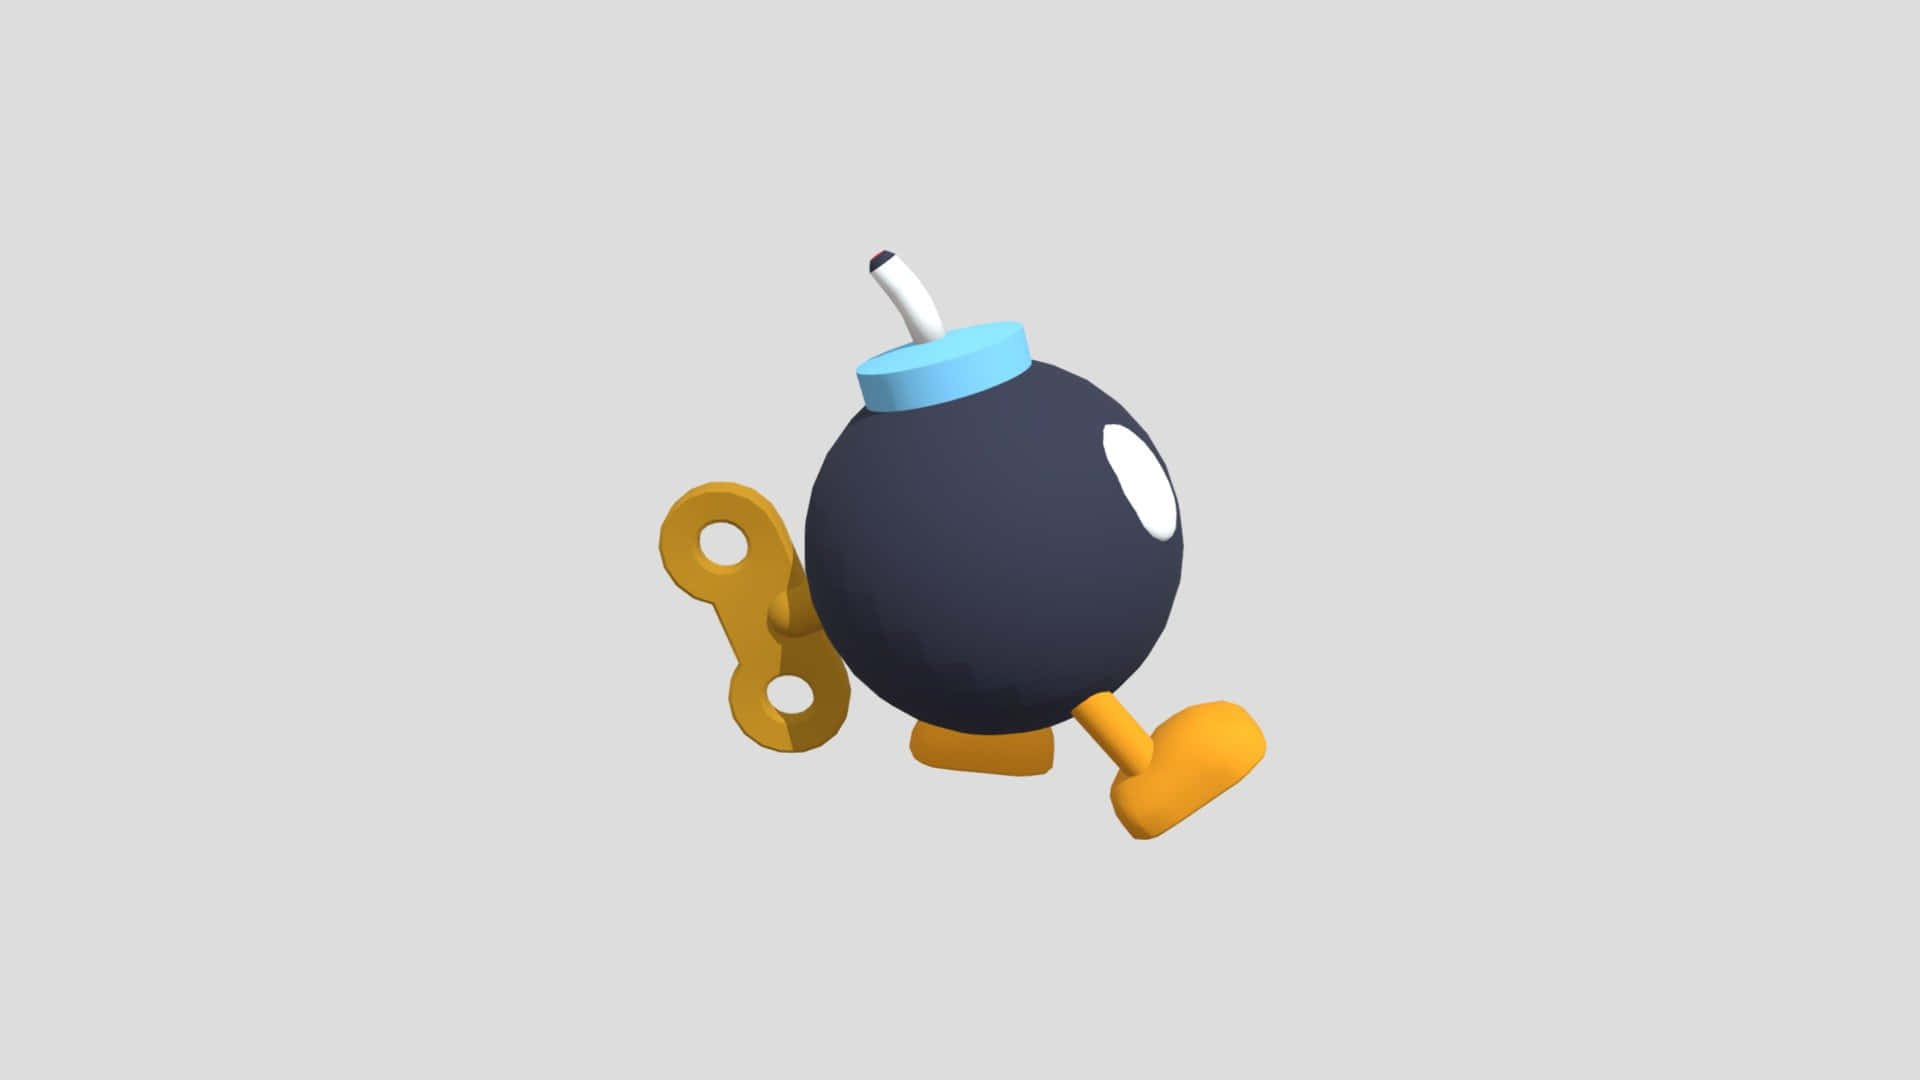 Explosive Bob-omb character from the popular Mario game series Wallpaper